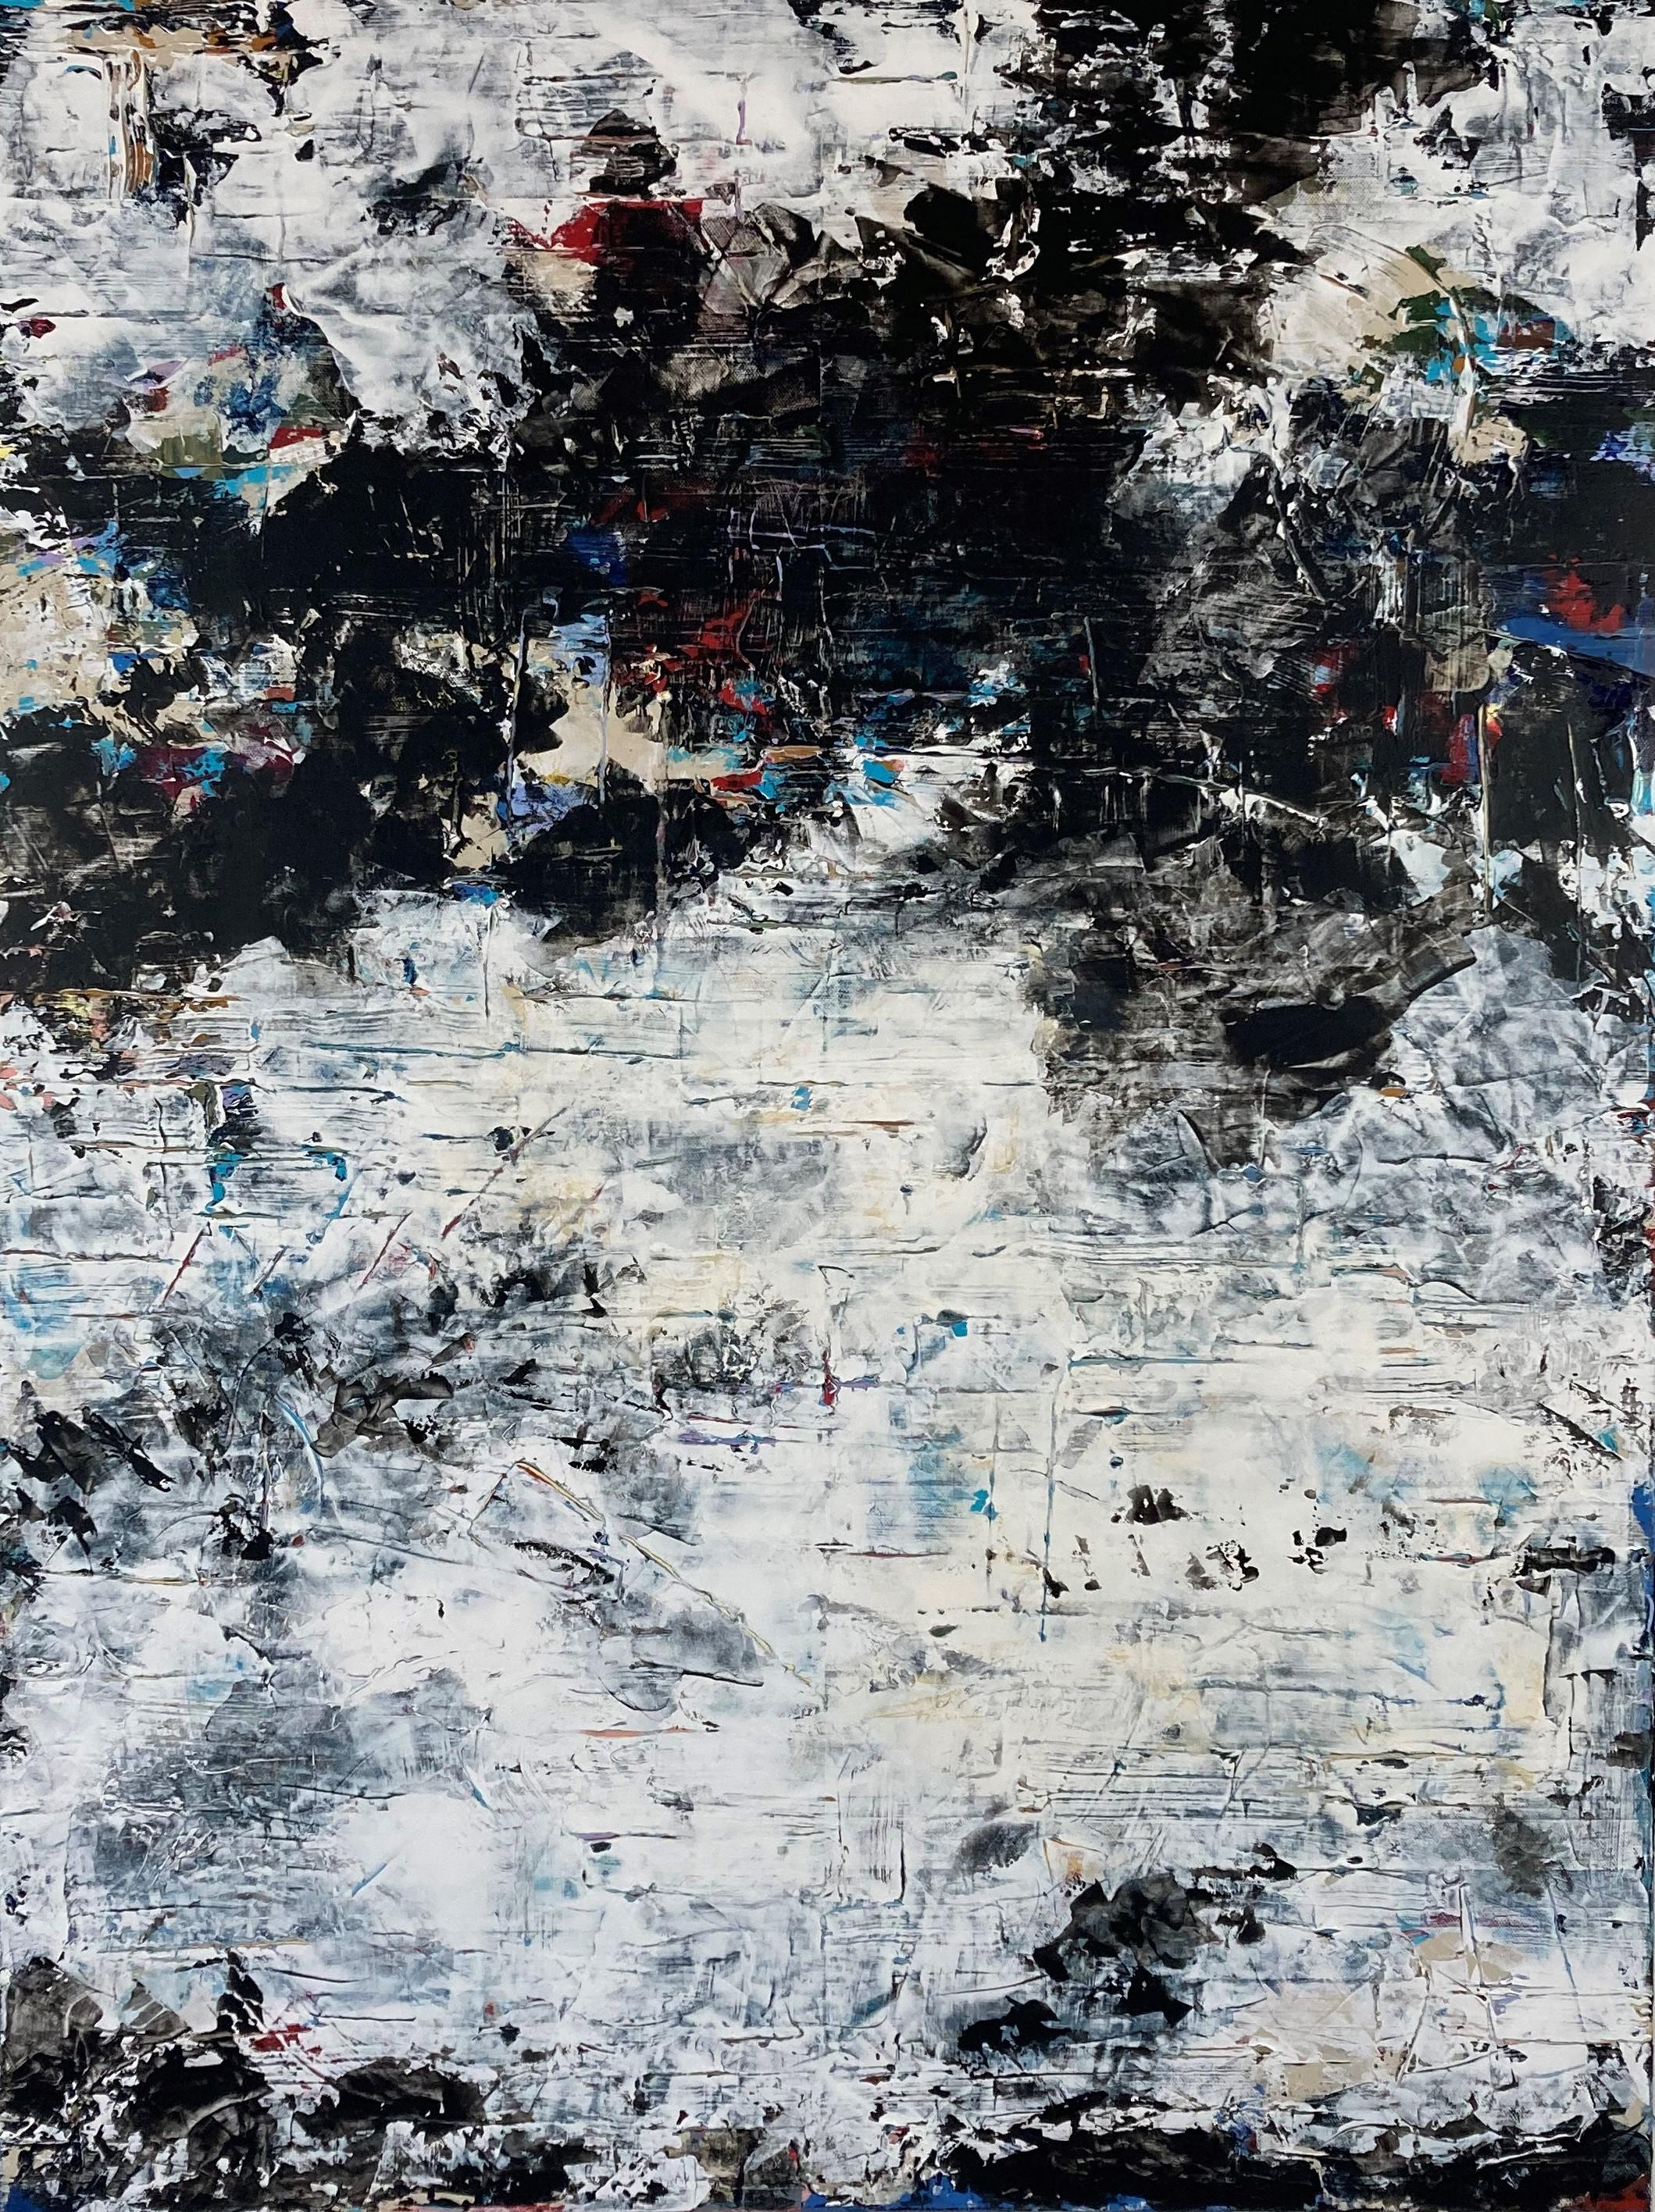 <p>Artist Comments<br>Artist Gary J. Noland Jr. presents a dramatic abstraction of heavenly bodies in bold strokes of black and white. An entry to his textural Dark Cloud series of intense and powerful skyscapes. The work consists of various layers